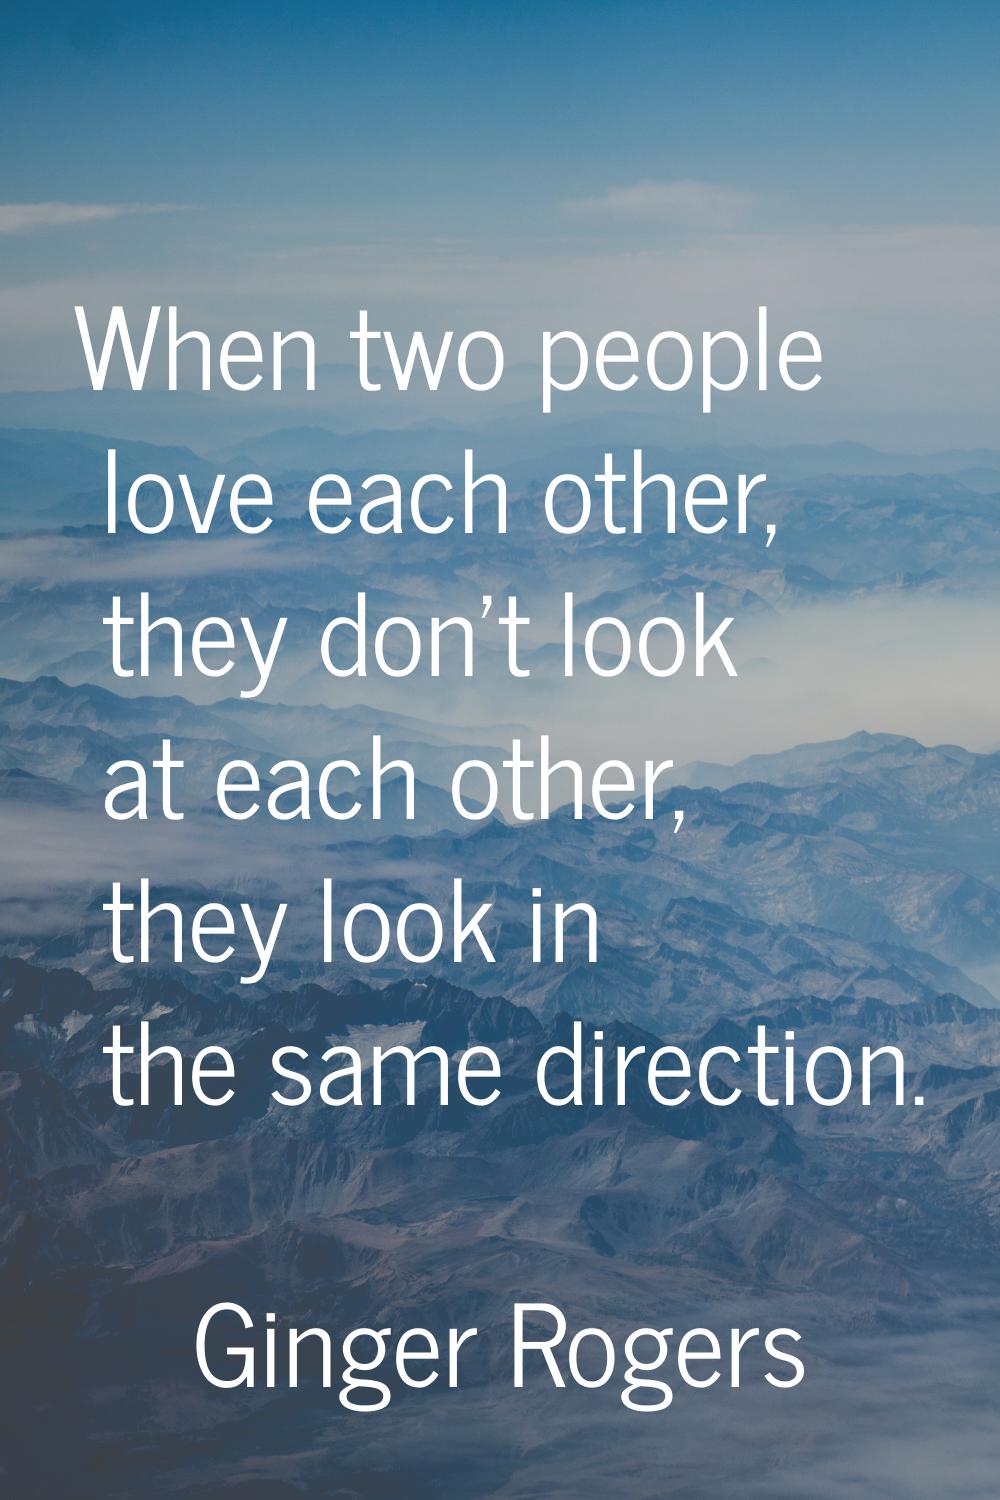 When two people love each other, they don't look at each other, they look in the same direction.